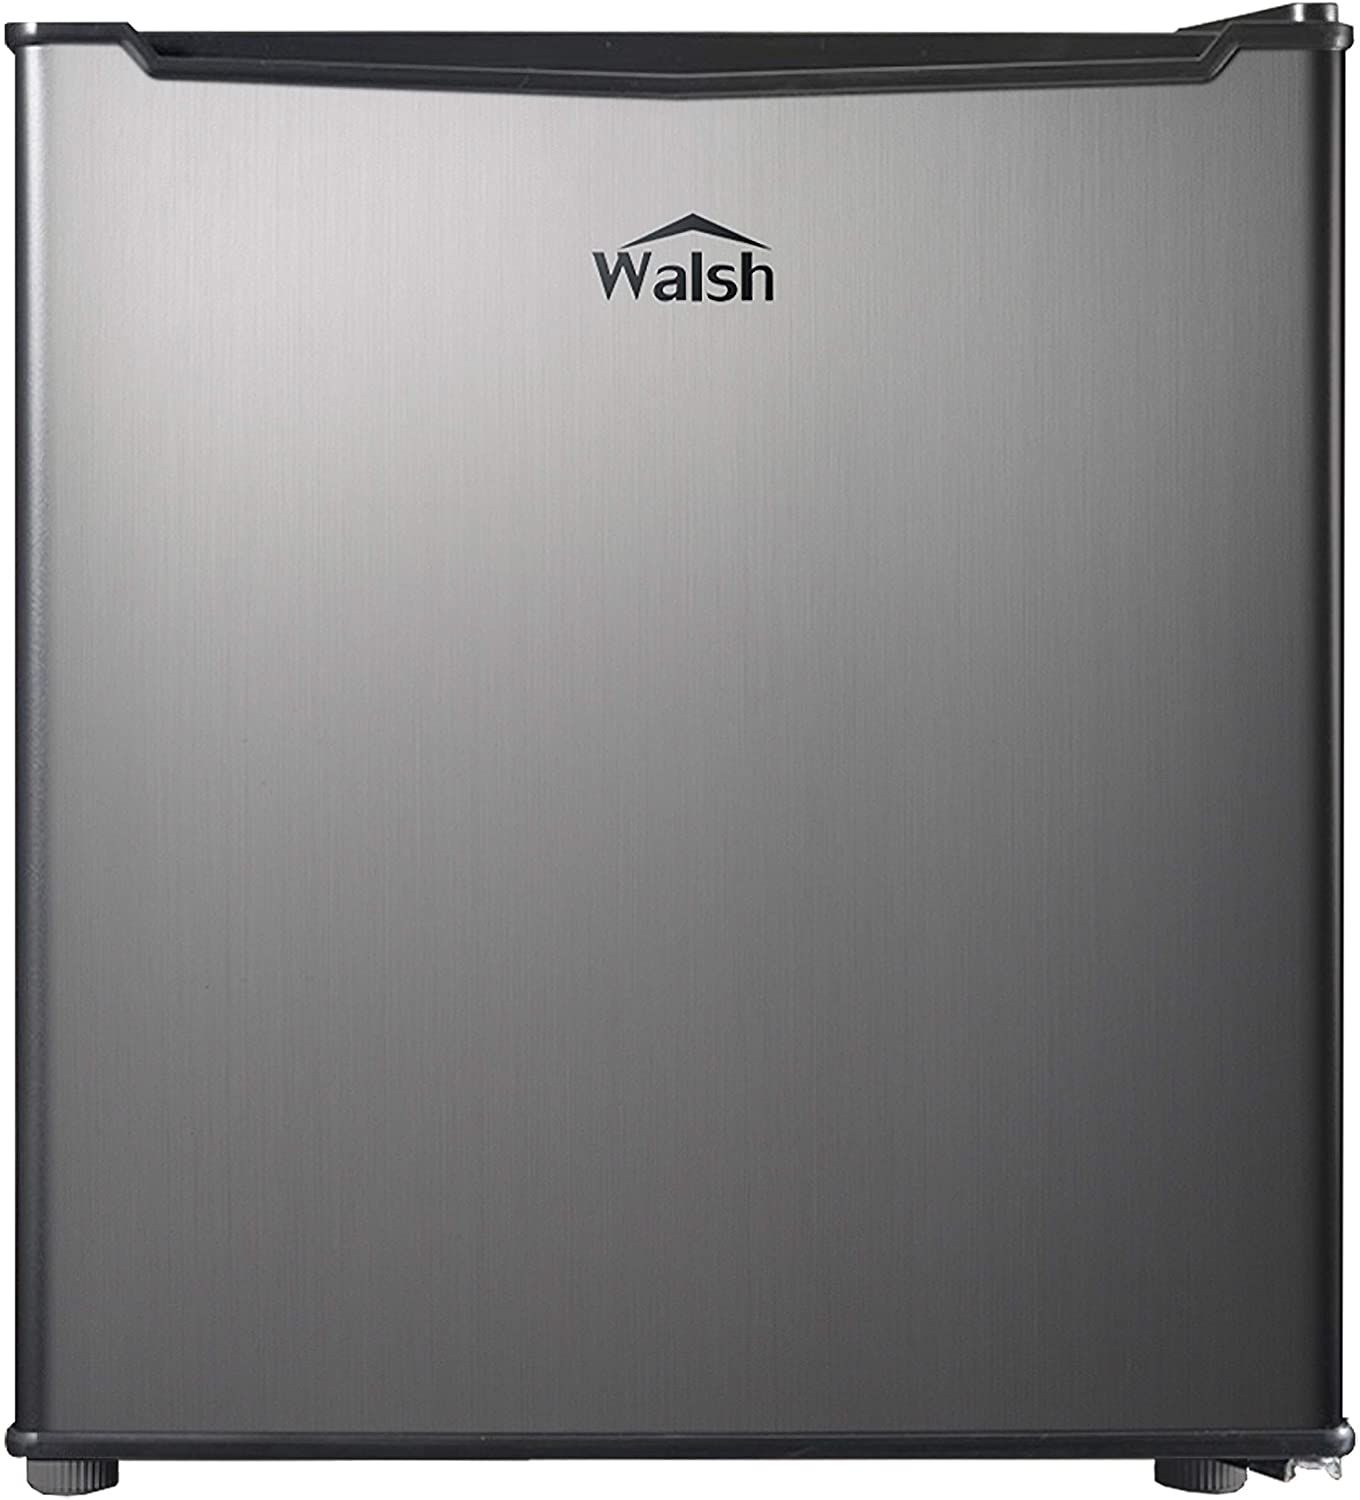 Walsh WSR17S5 Under-Counter Compact Refrigerator, 1.7 Cu. Ft Single Door Fridge, Adjustable Mechanical Thermostat With Chiller, Reversible Doors, Stainless Steel Look